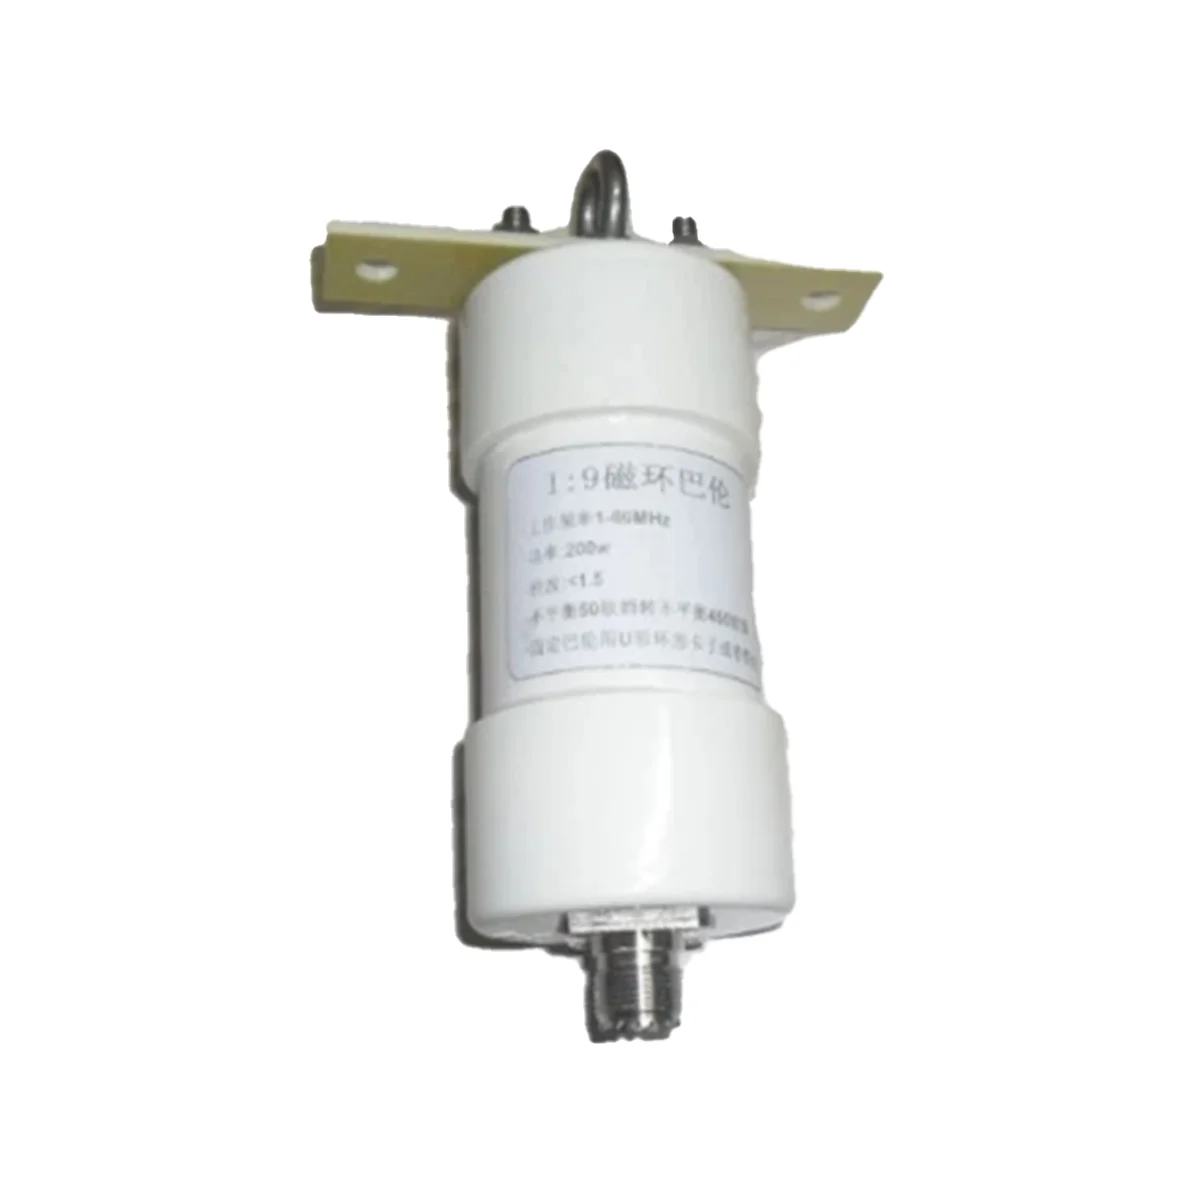 

1:9 Balun 200W Short Wave Balun HAM Long Wire HF Antenna RTL-SDR 1-56MHz 50 Ohm To 450 Ohms NOX-150 Magnetic